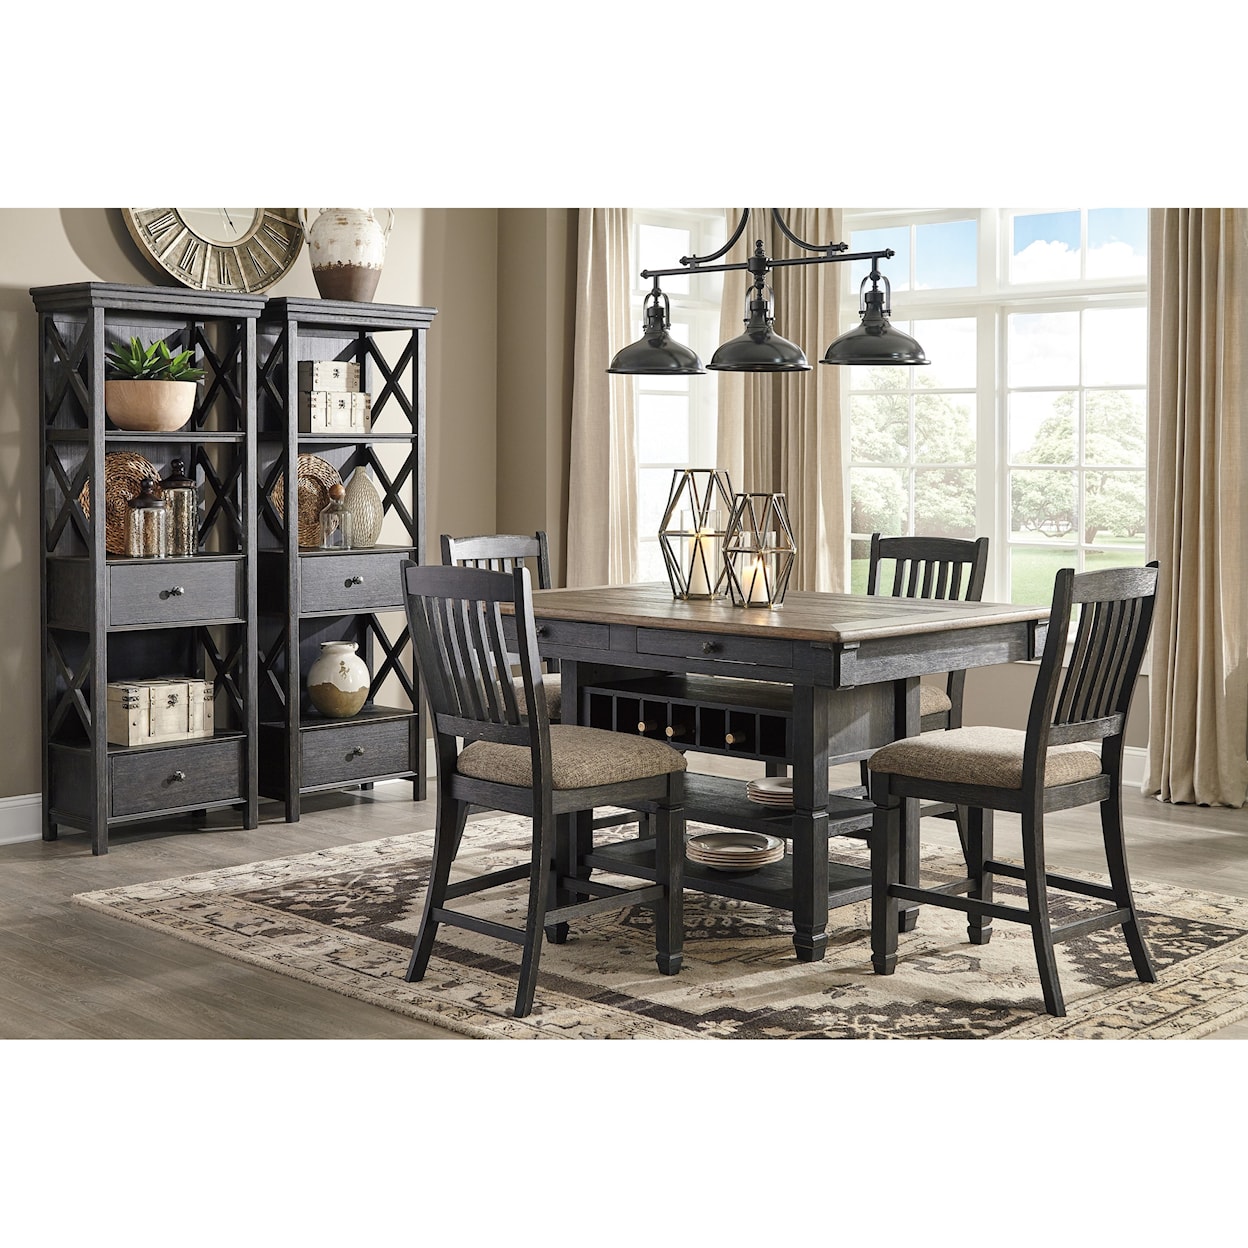 Ashley Signature Design Tyler Creek Casual Dining Room Group